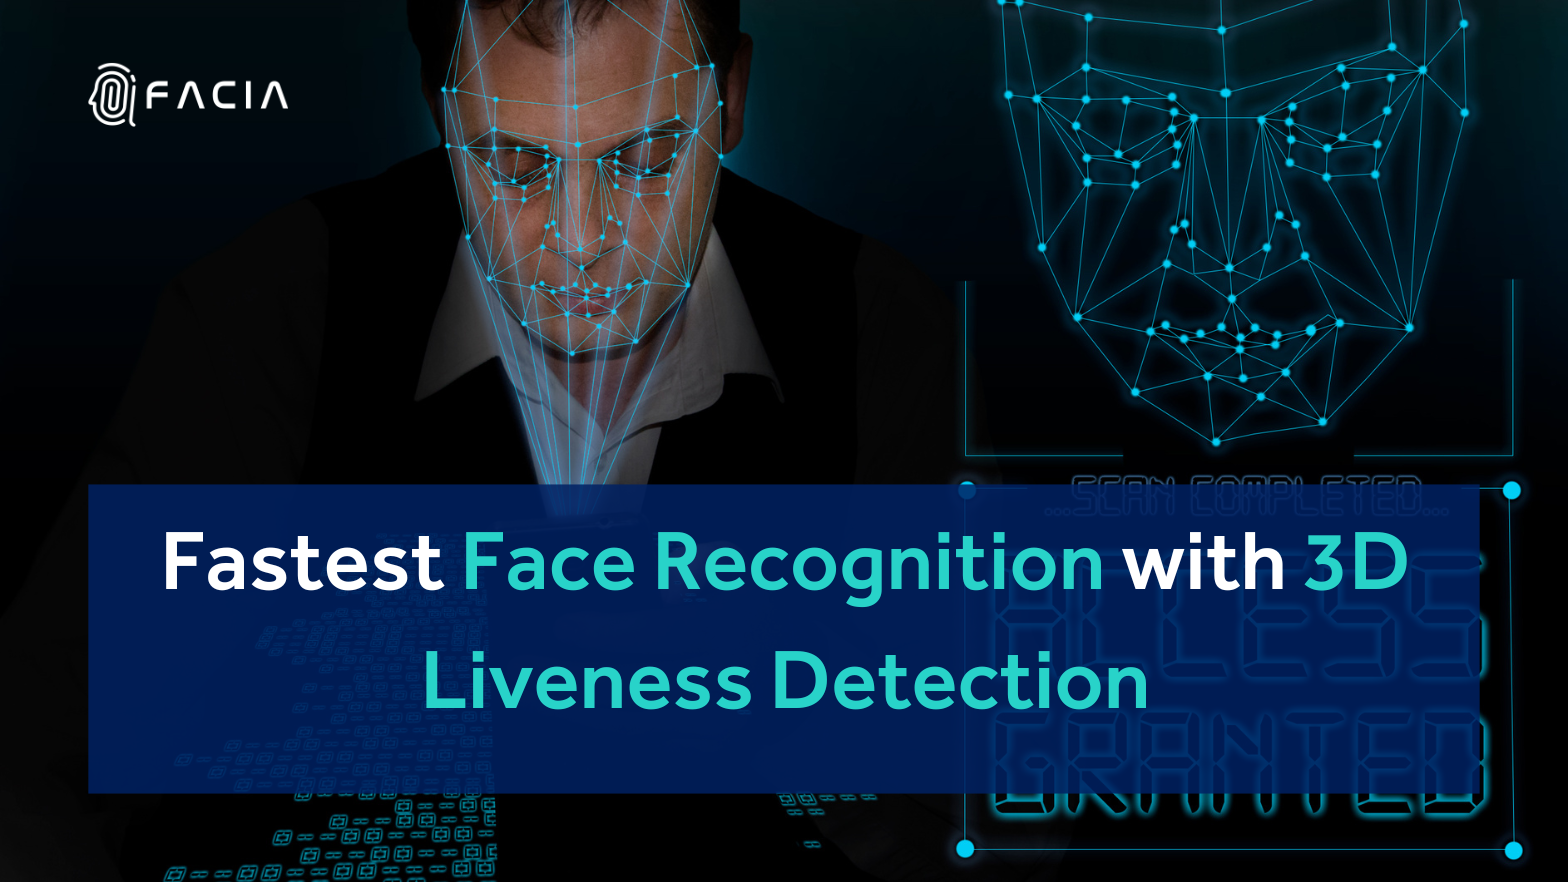 Advantages of Face Recognition with Liveness Detection